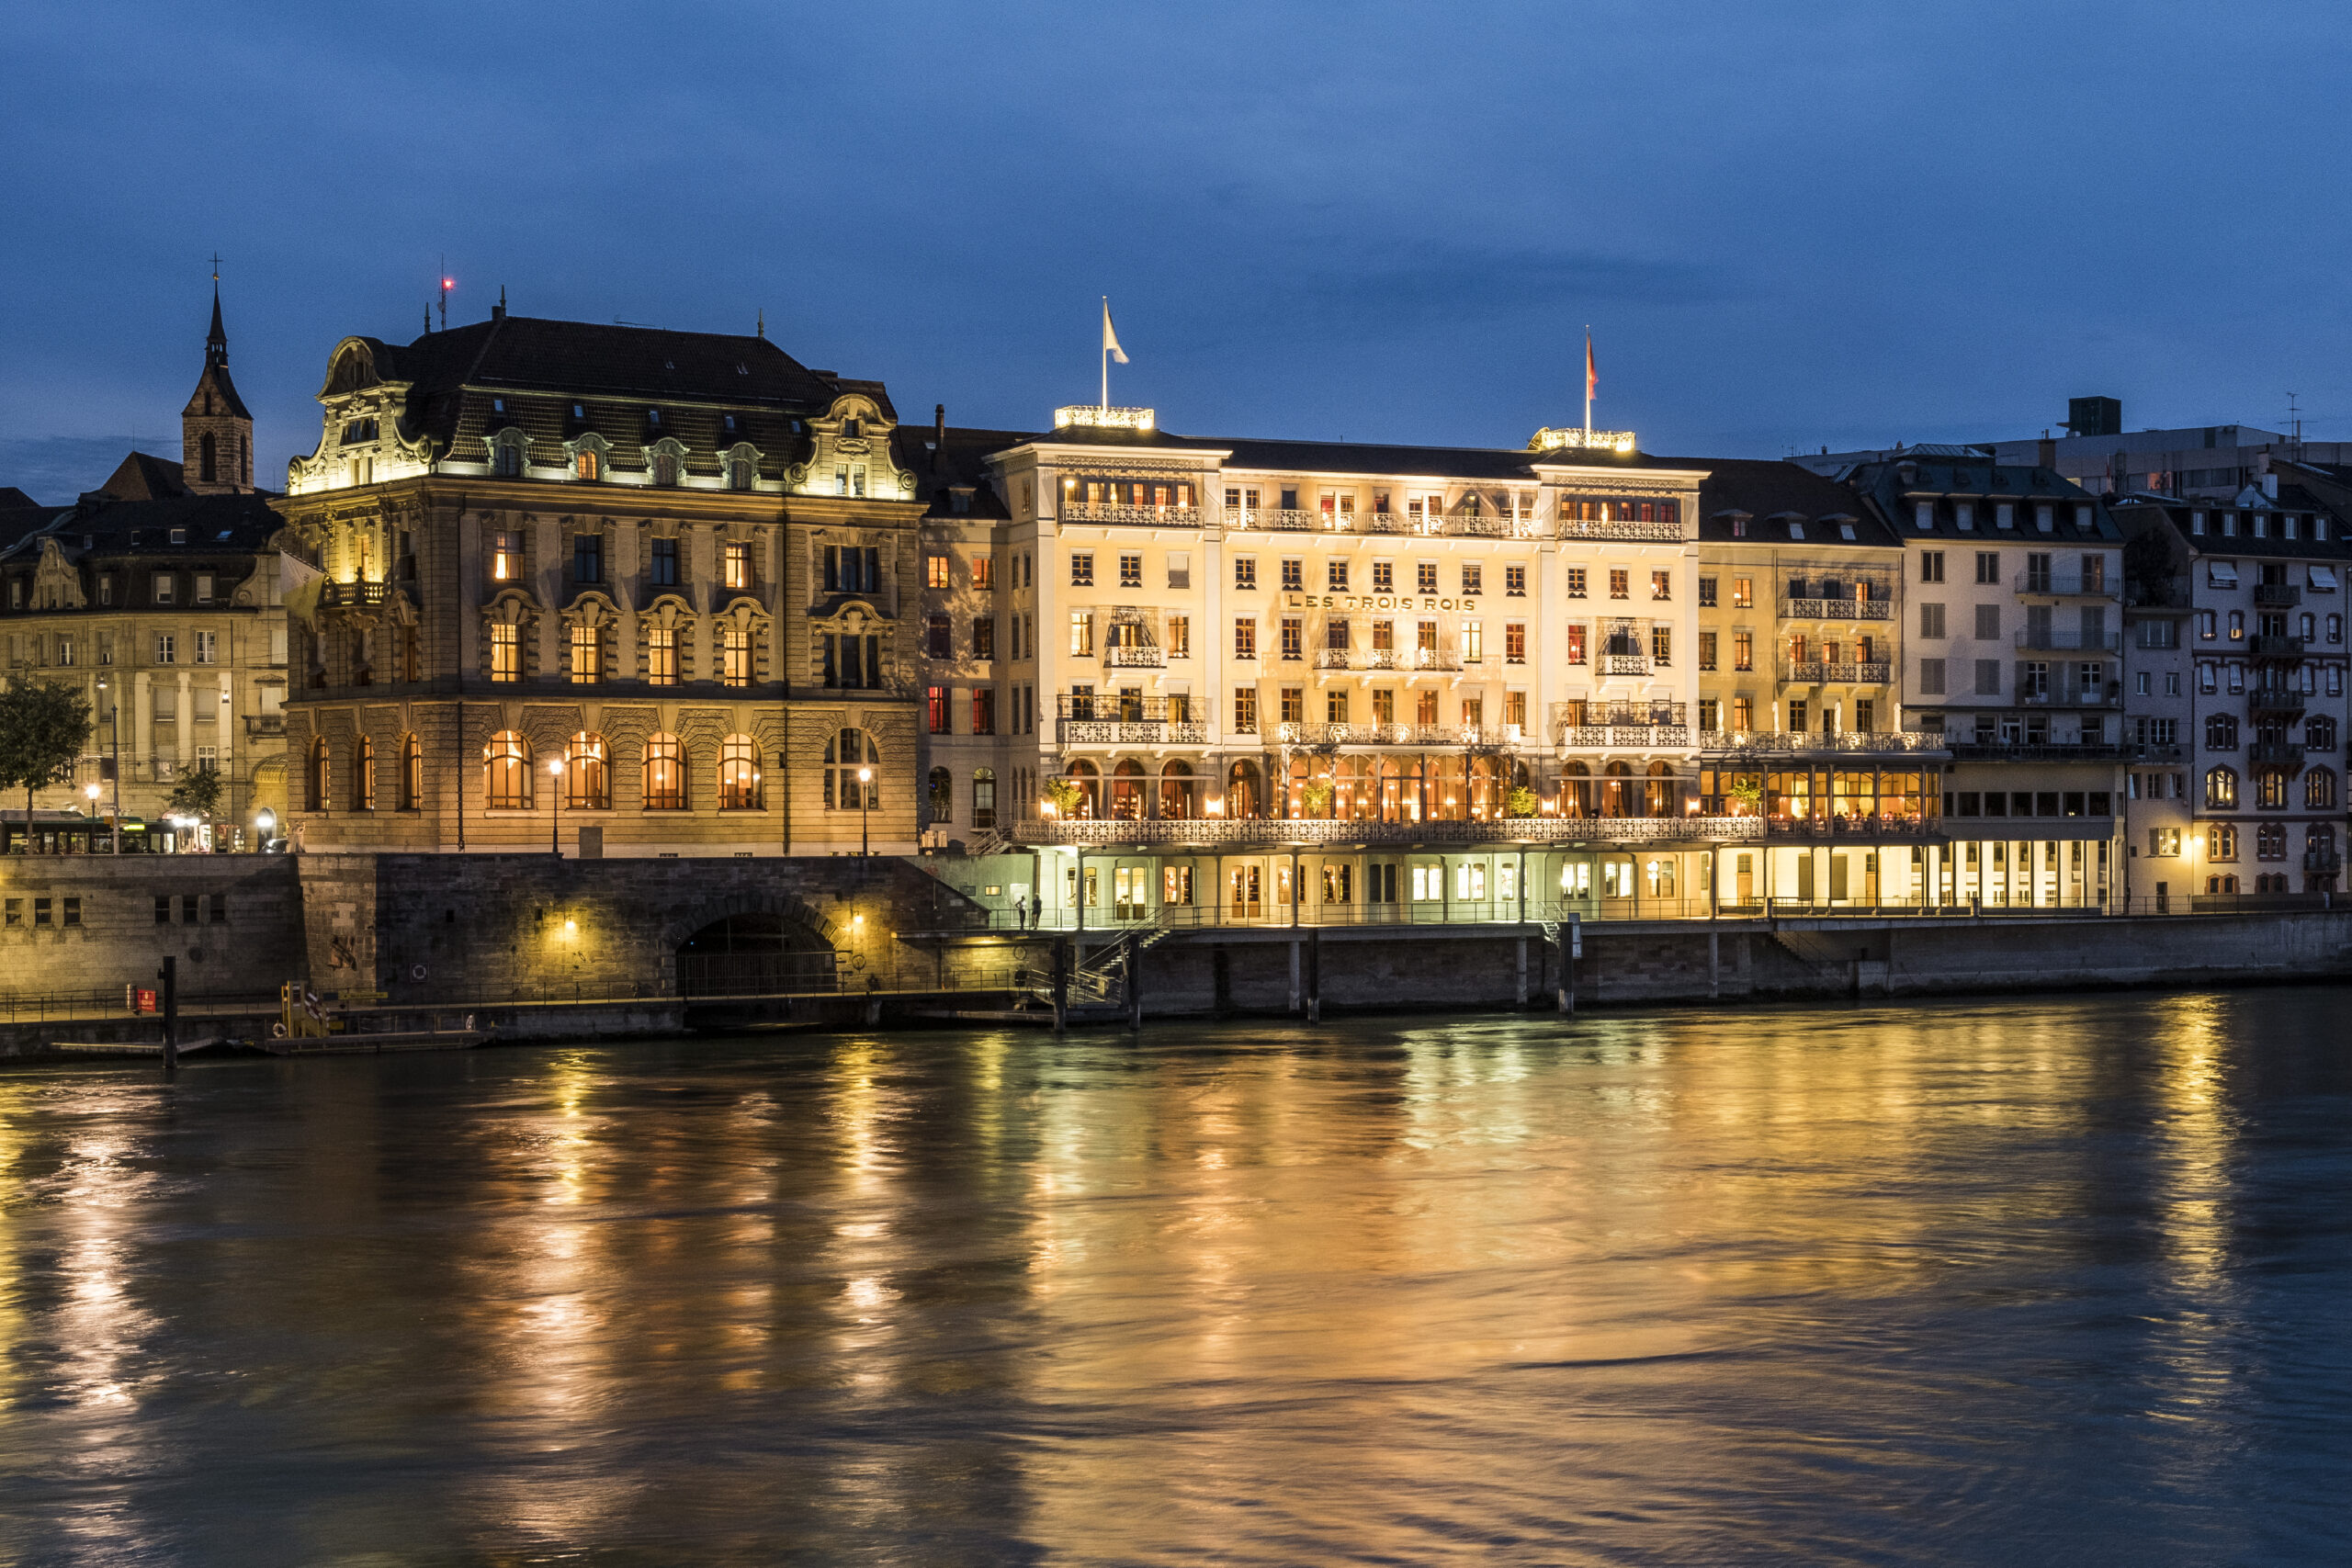 Grand Hotel Les Trois Rois in Basel on the Rhine